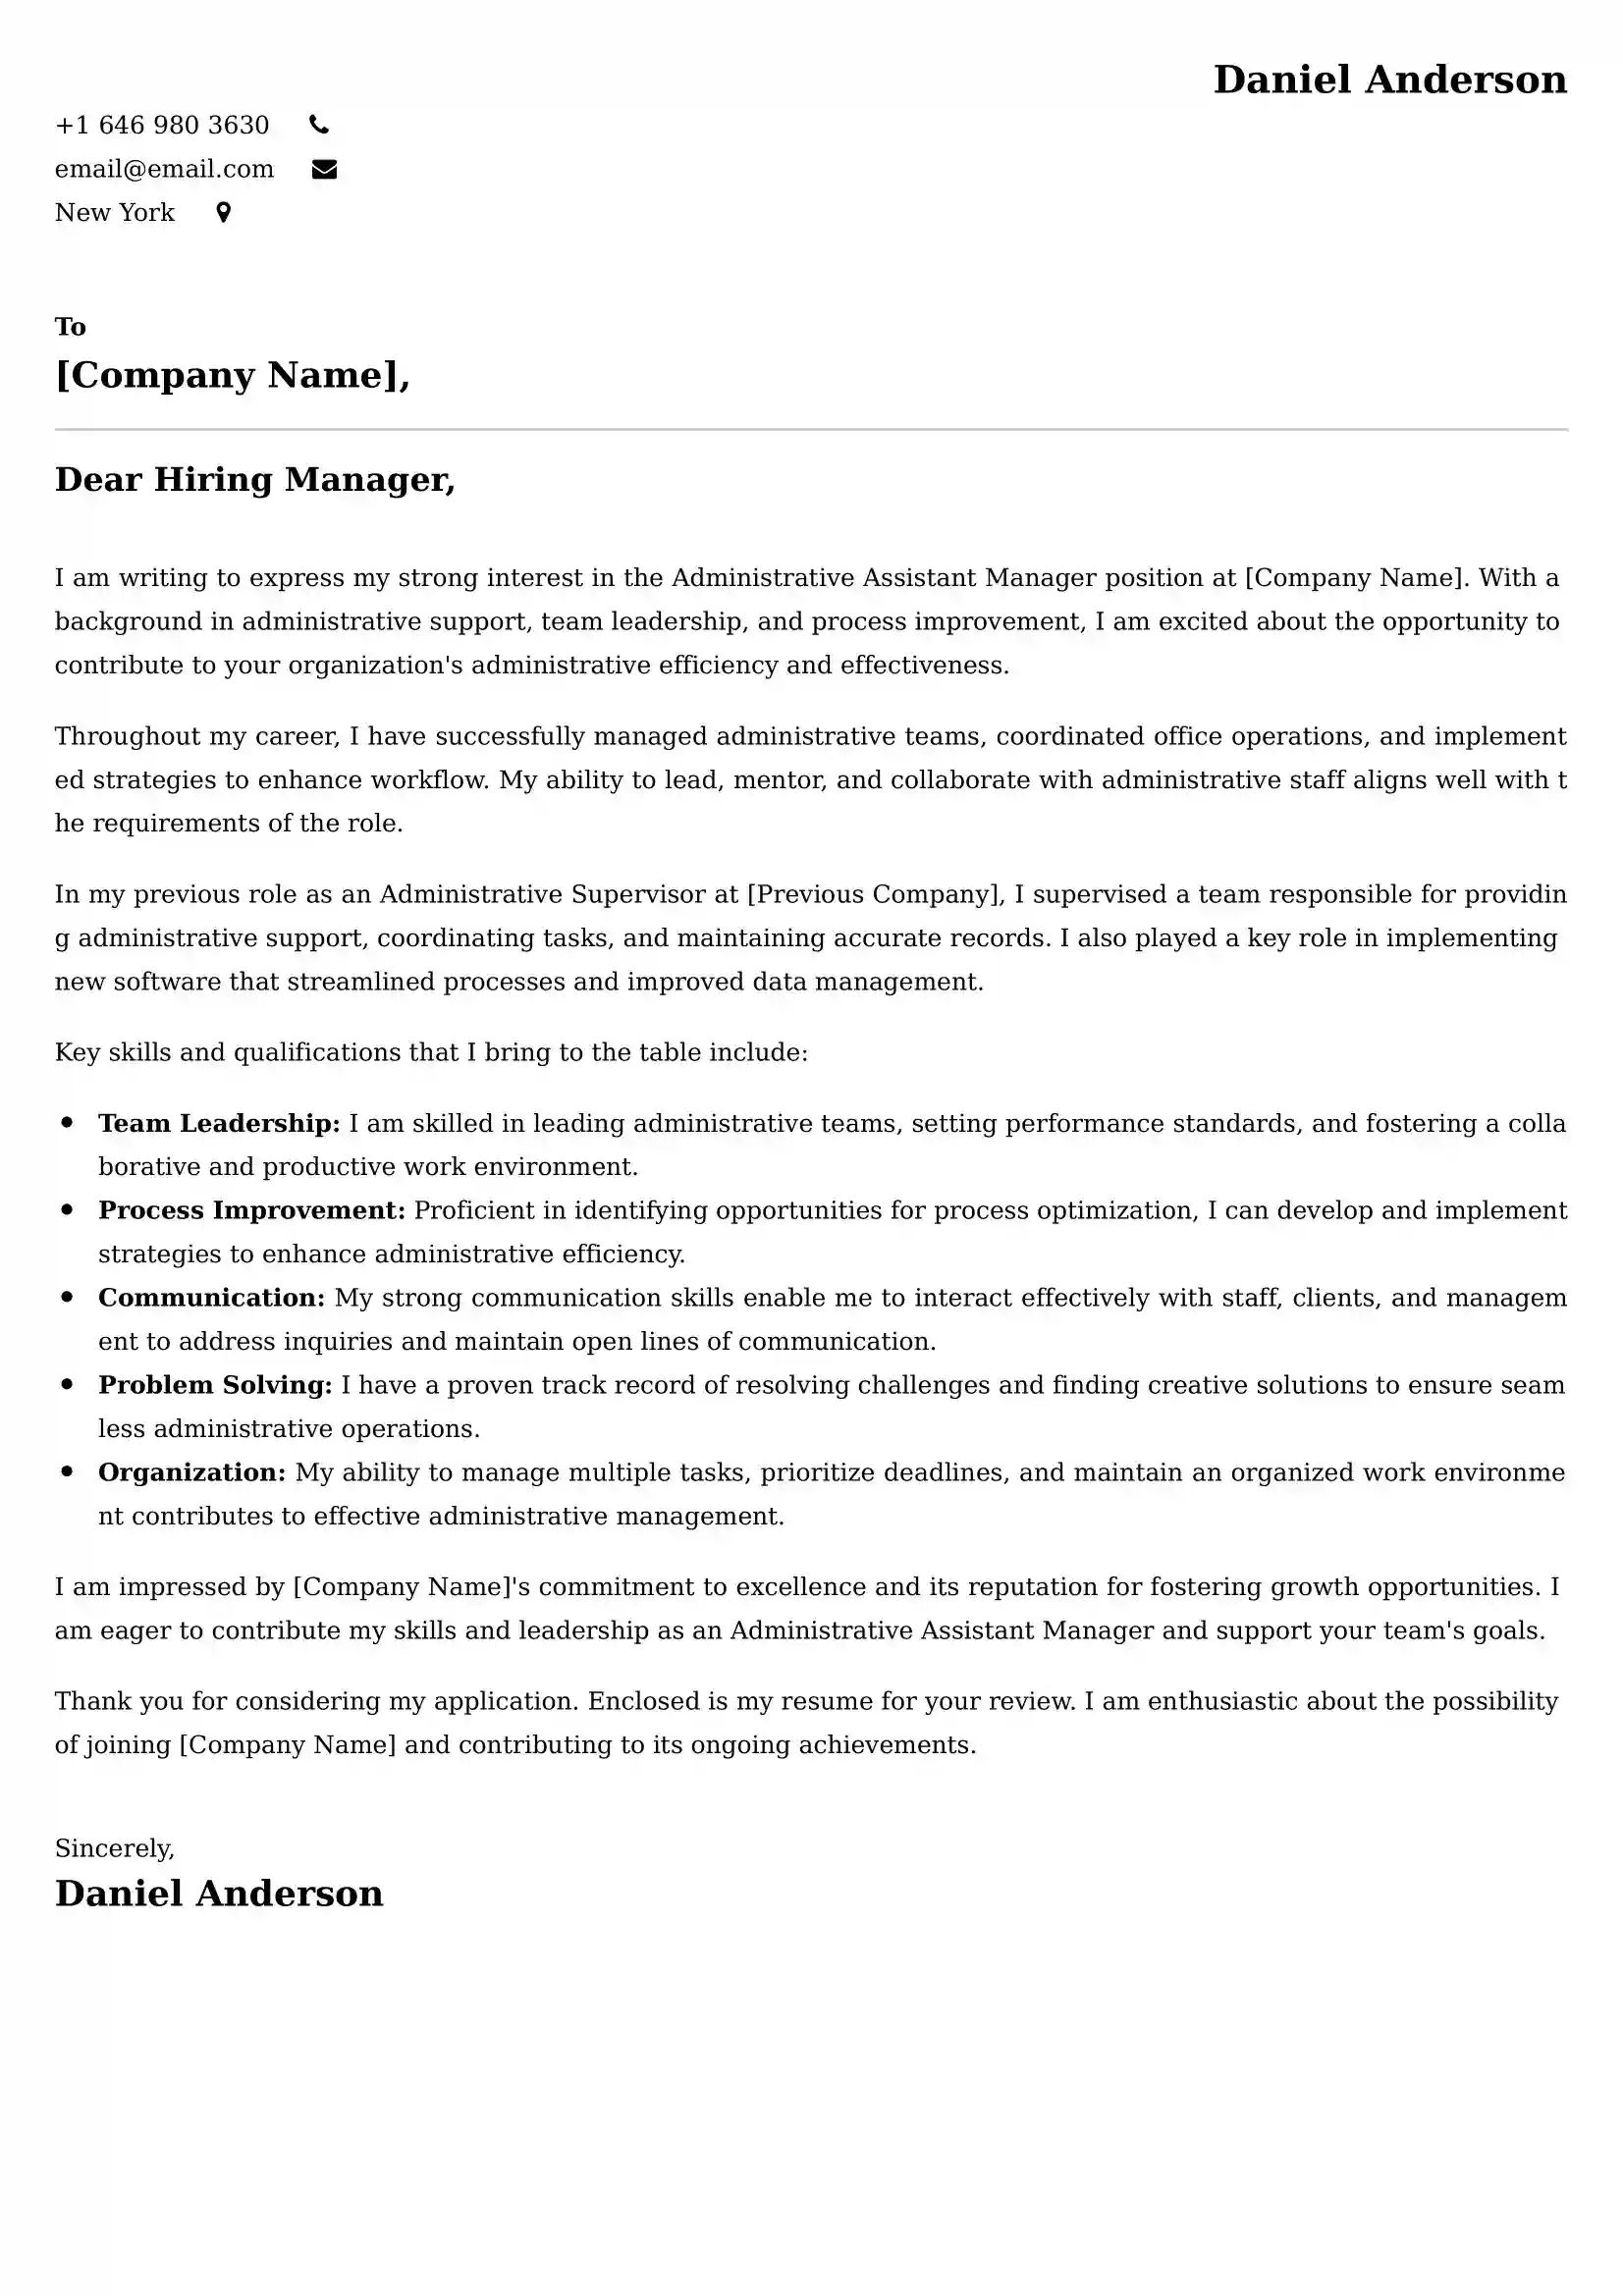 Administrative Assistant Manager Cover Letter Examples -Latest Brazilian Templates